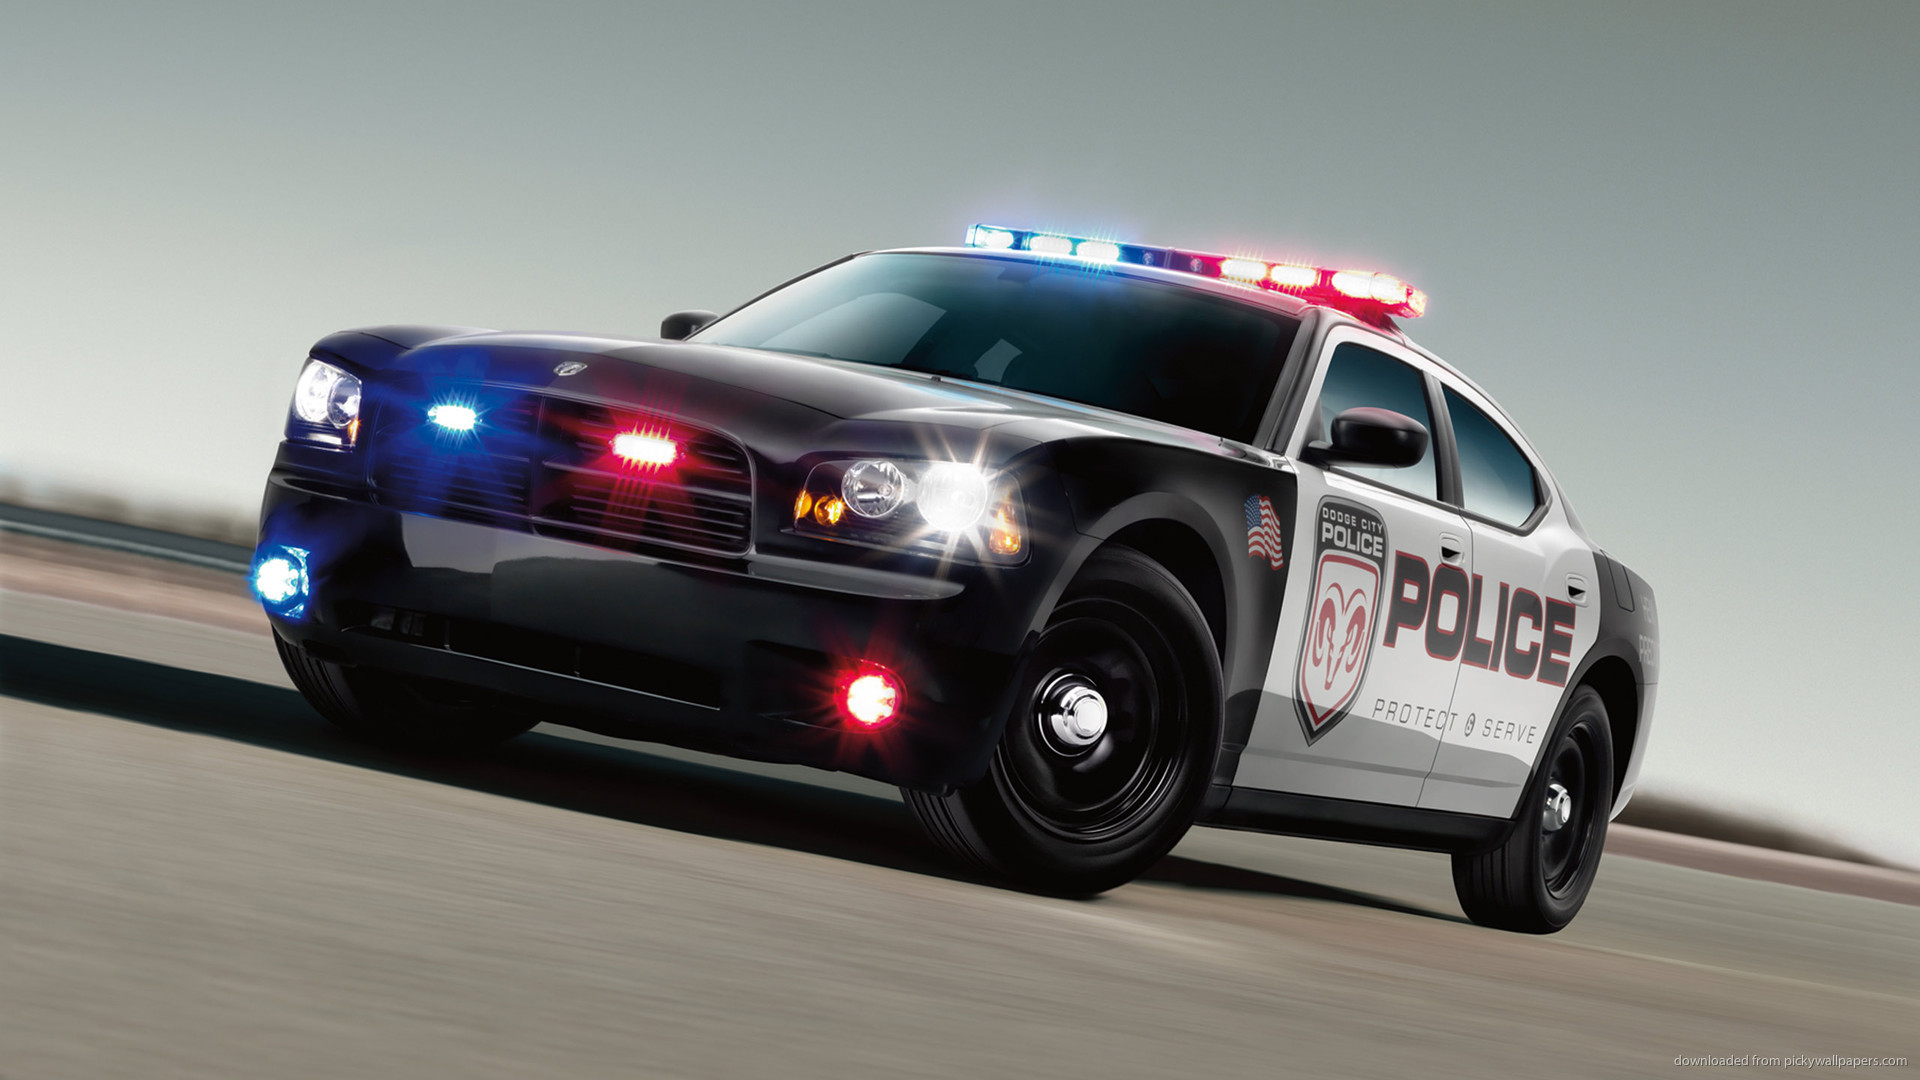 1920x1080 High Definition Police Wallpaper - Full HD Background